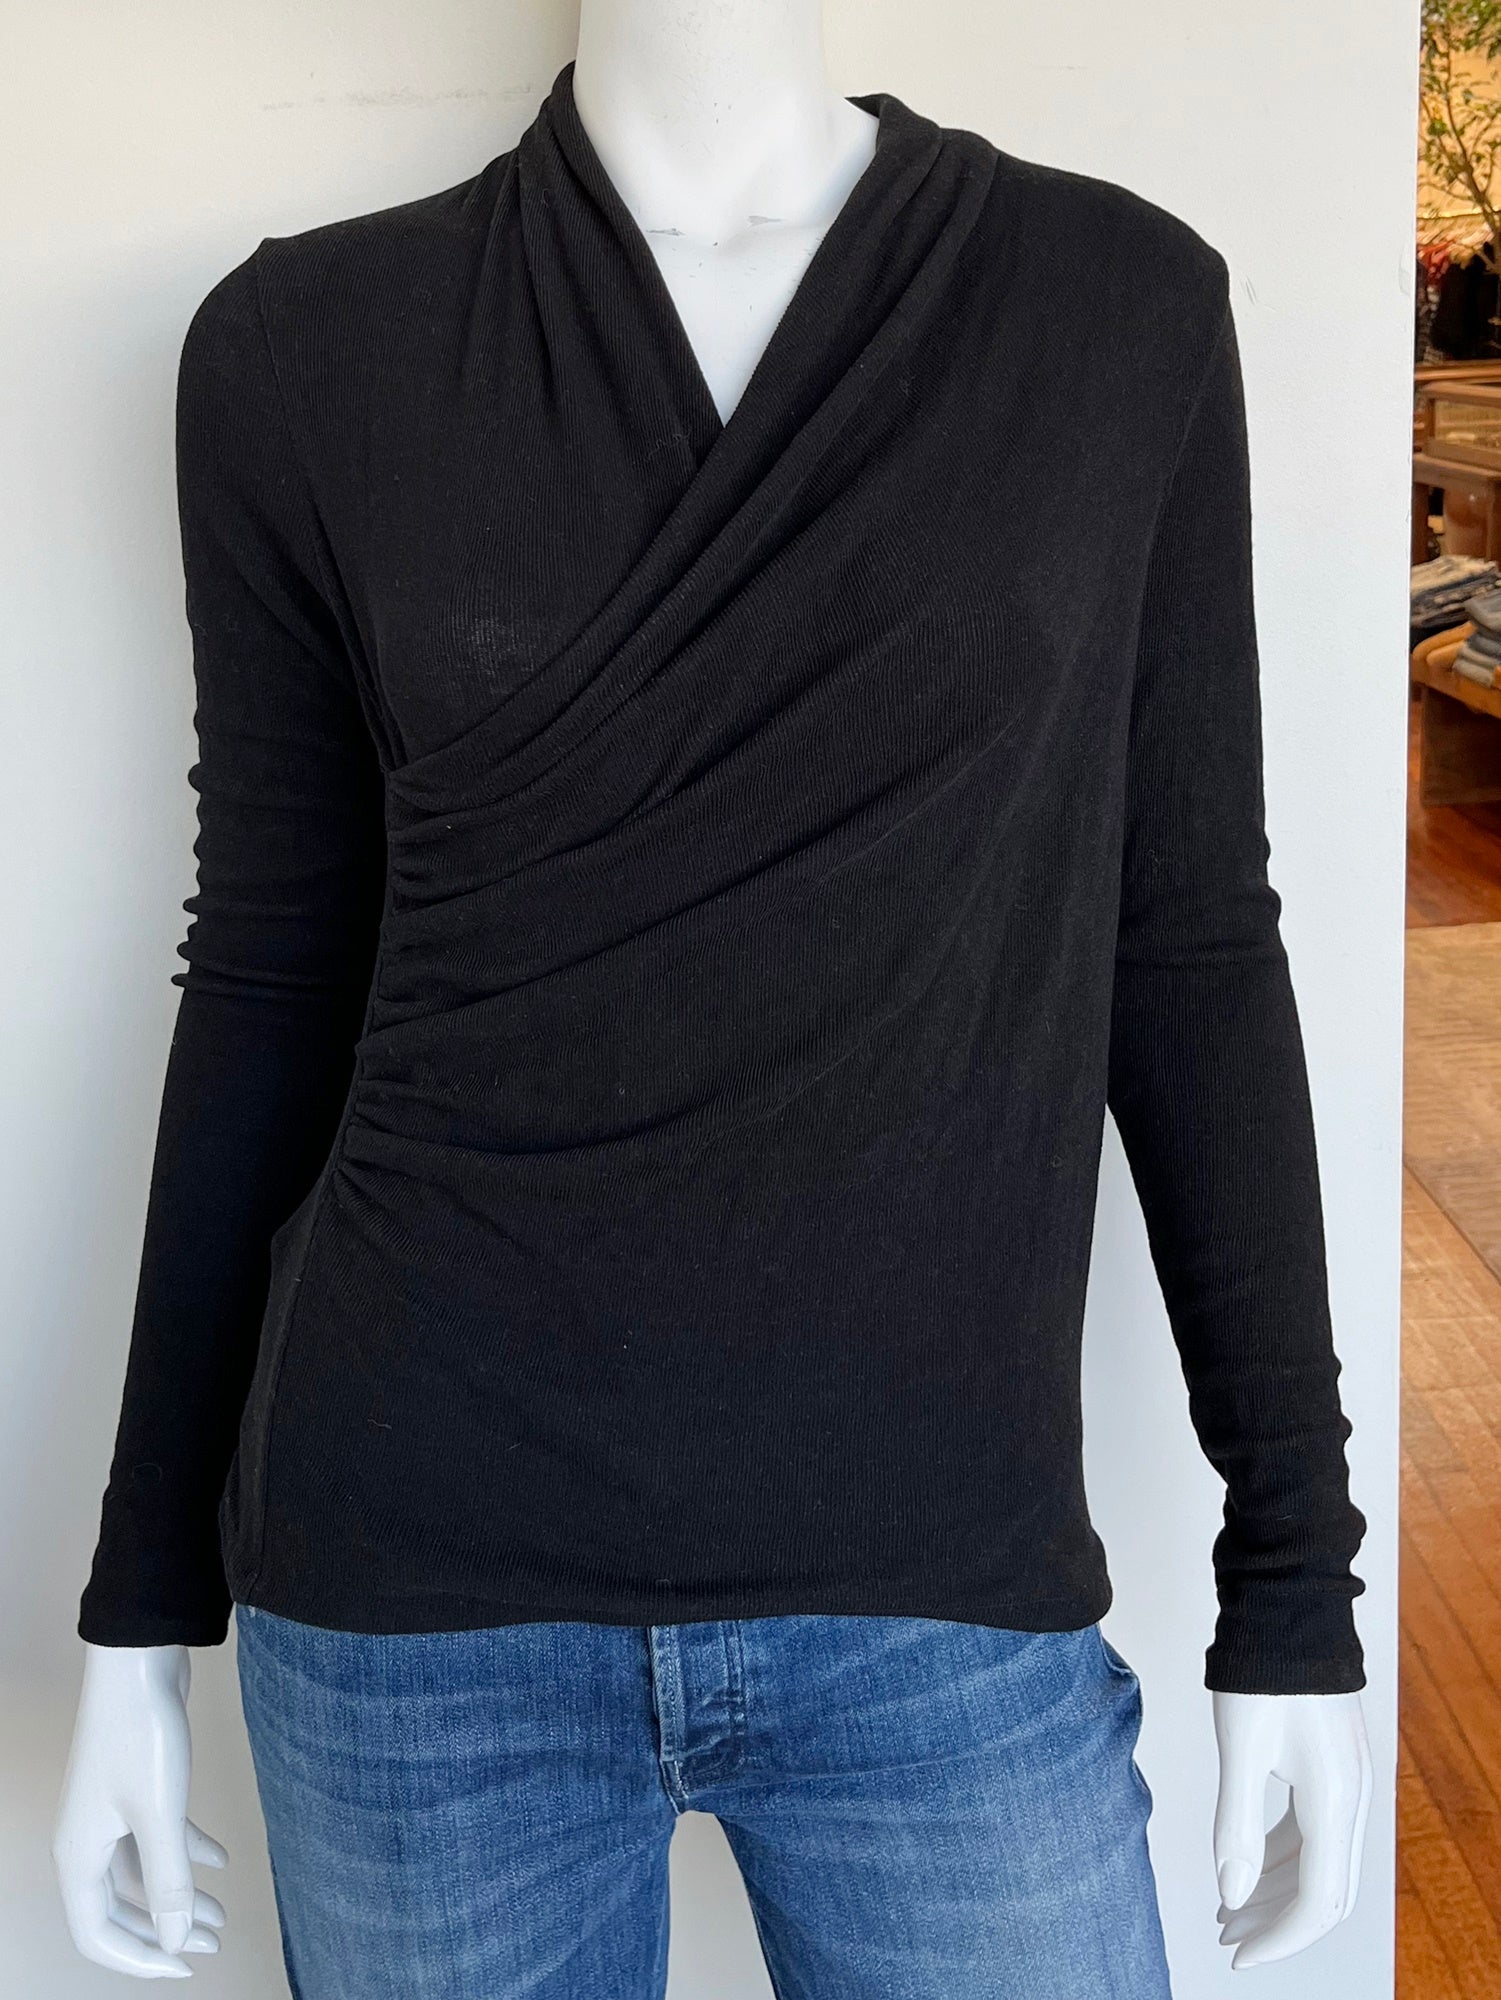 Ribbed Wrap Front Top Size Medium